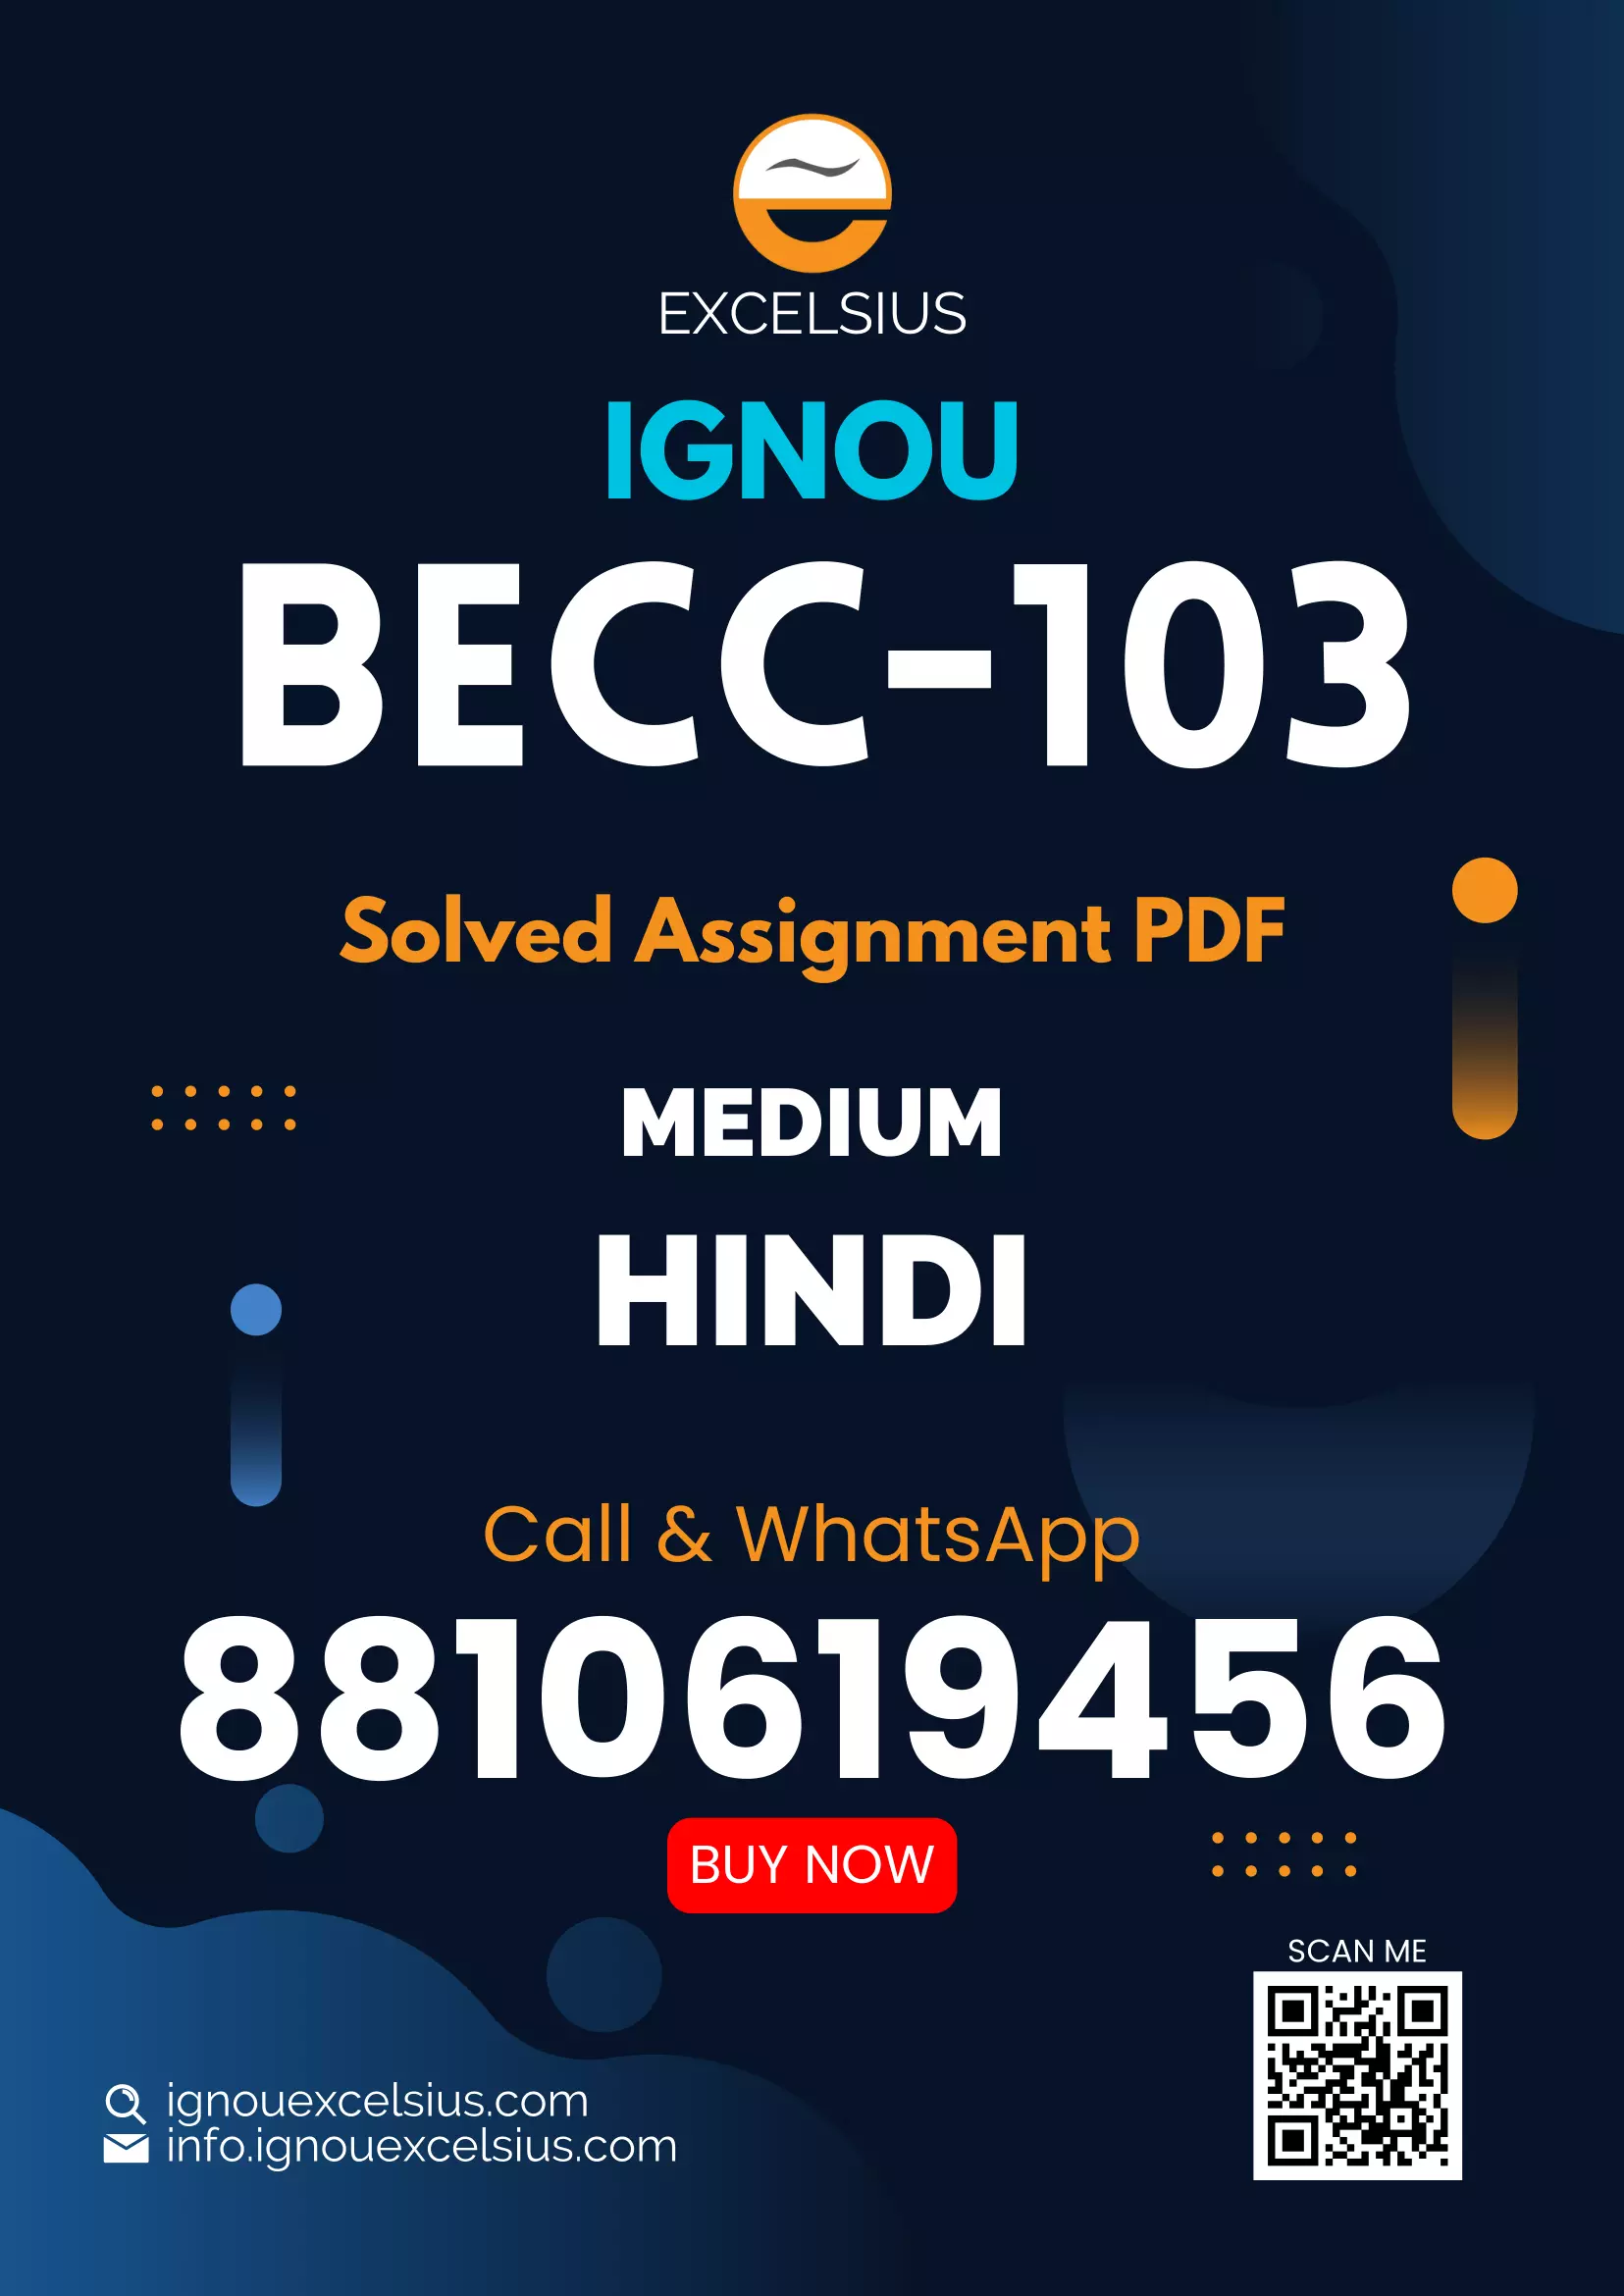 IGNOU BECC-103 - Introductory Macroeconomics, Latest Solved Assignment-July 2022 – January 2023